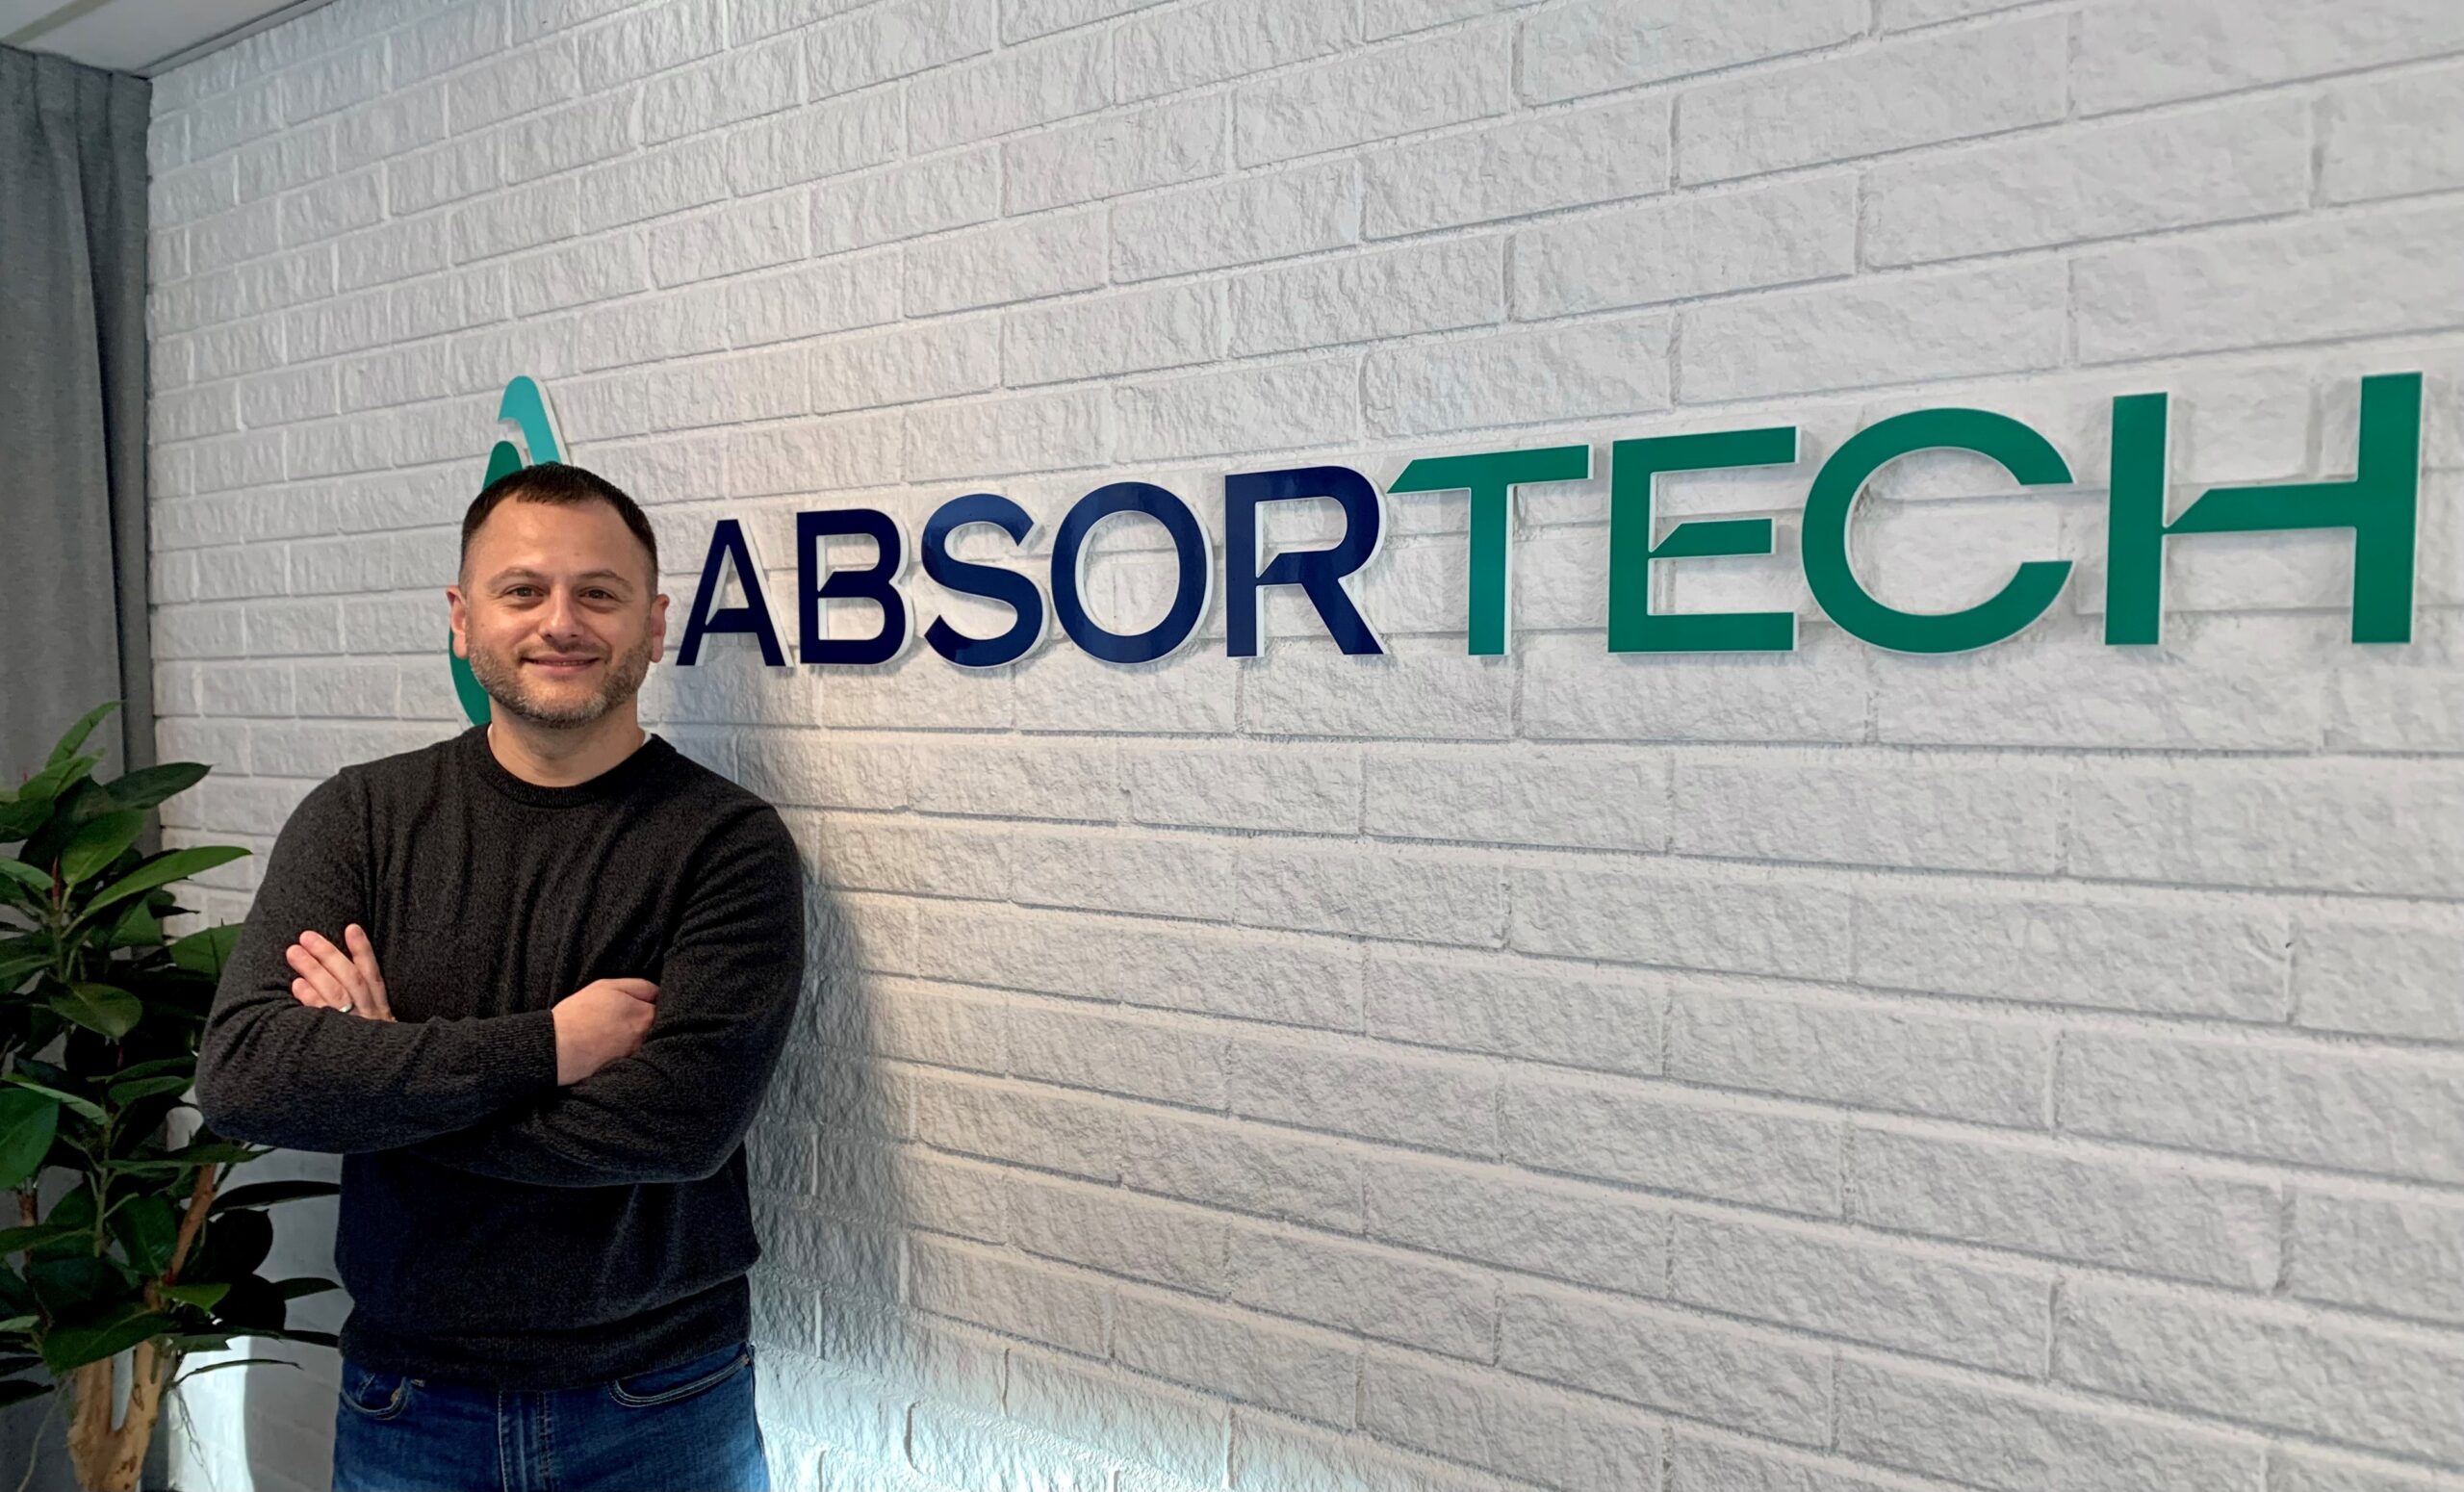 Vicente Reynoso in front of an Absortech sign.